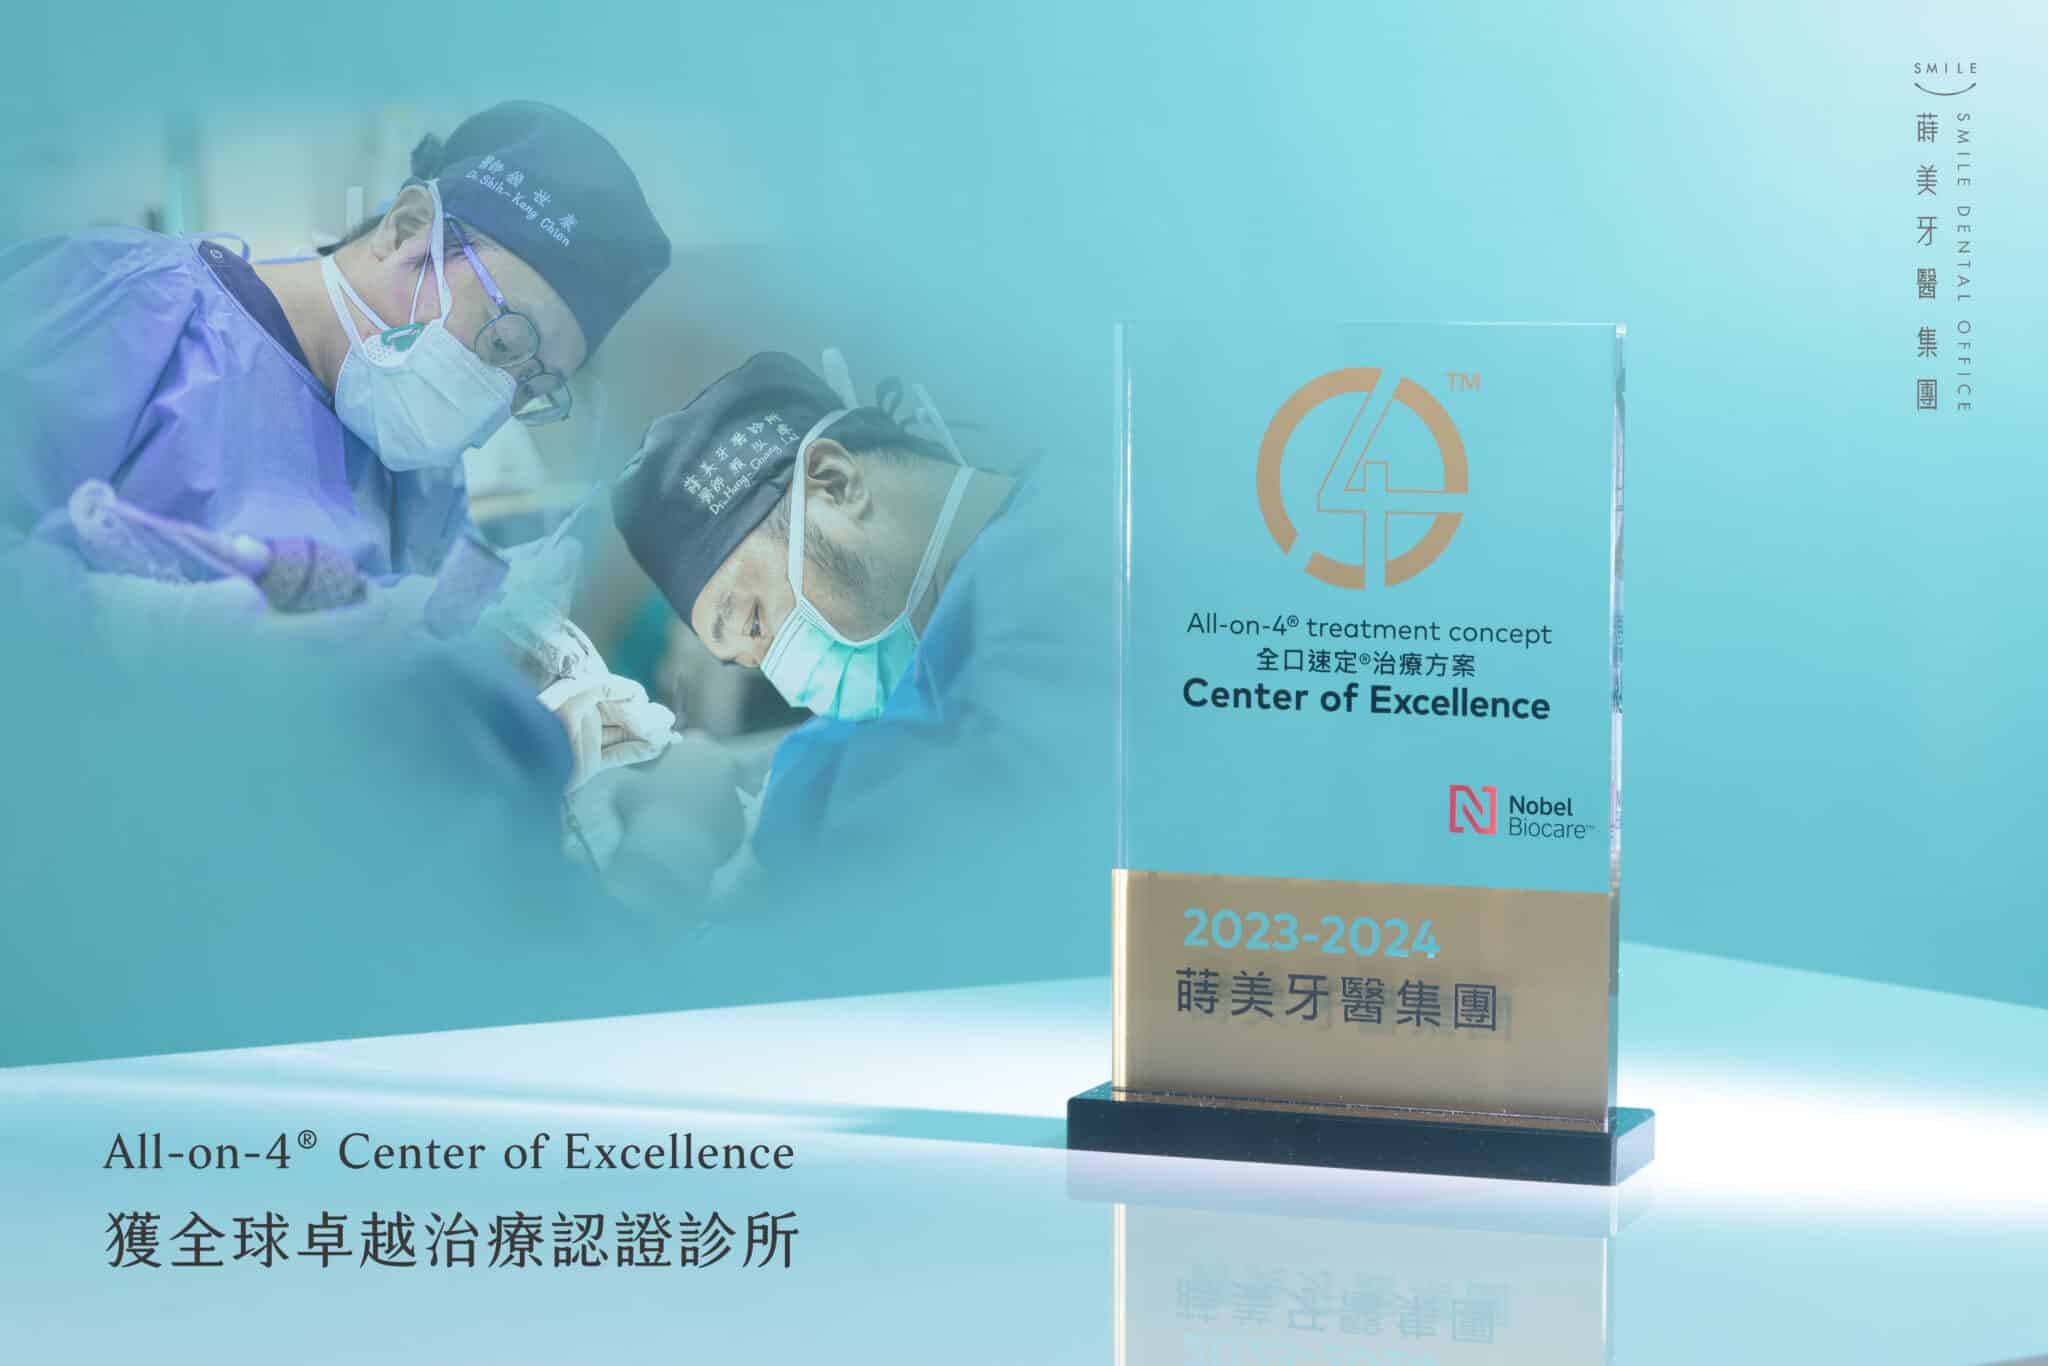 All-on-4® Center of Excellence 全球認證診所（臉書）